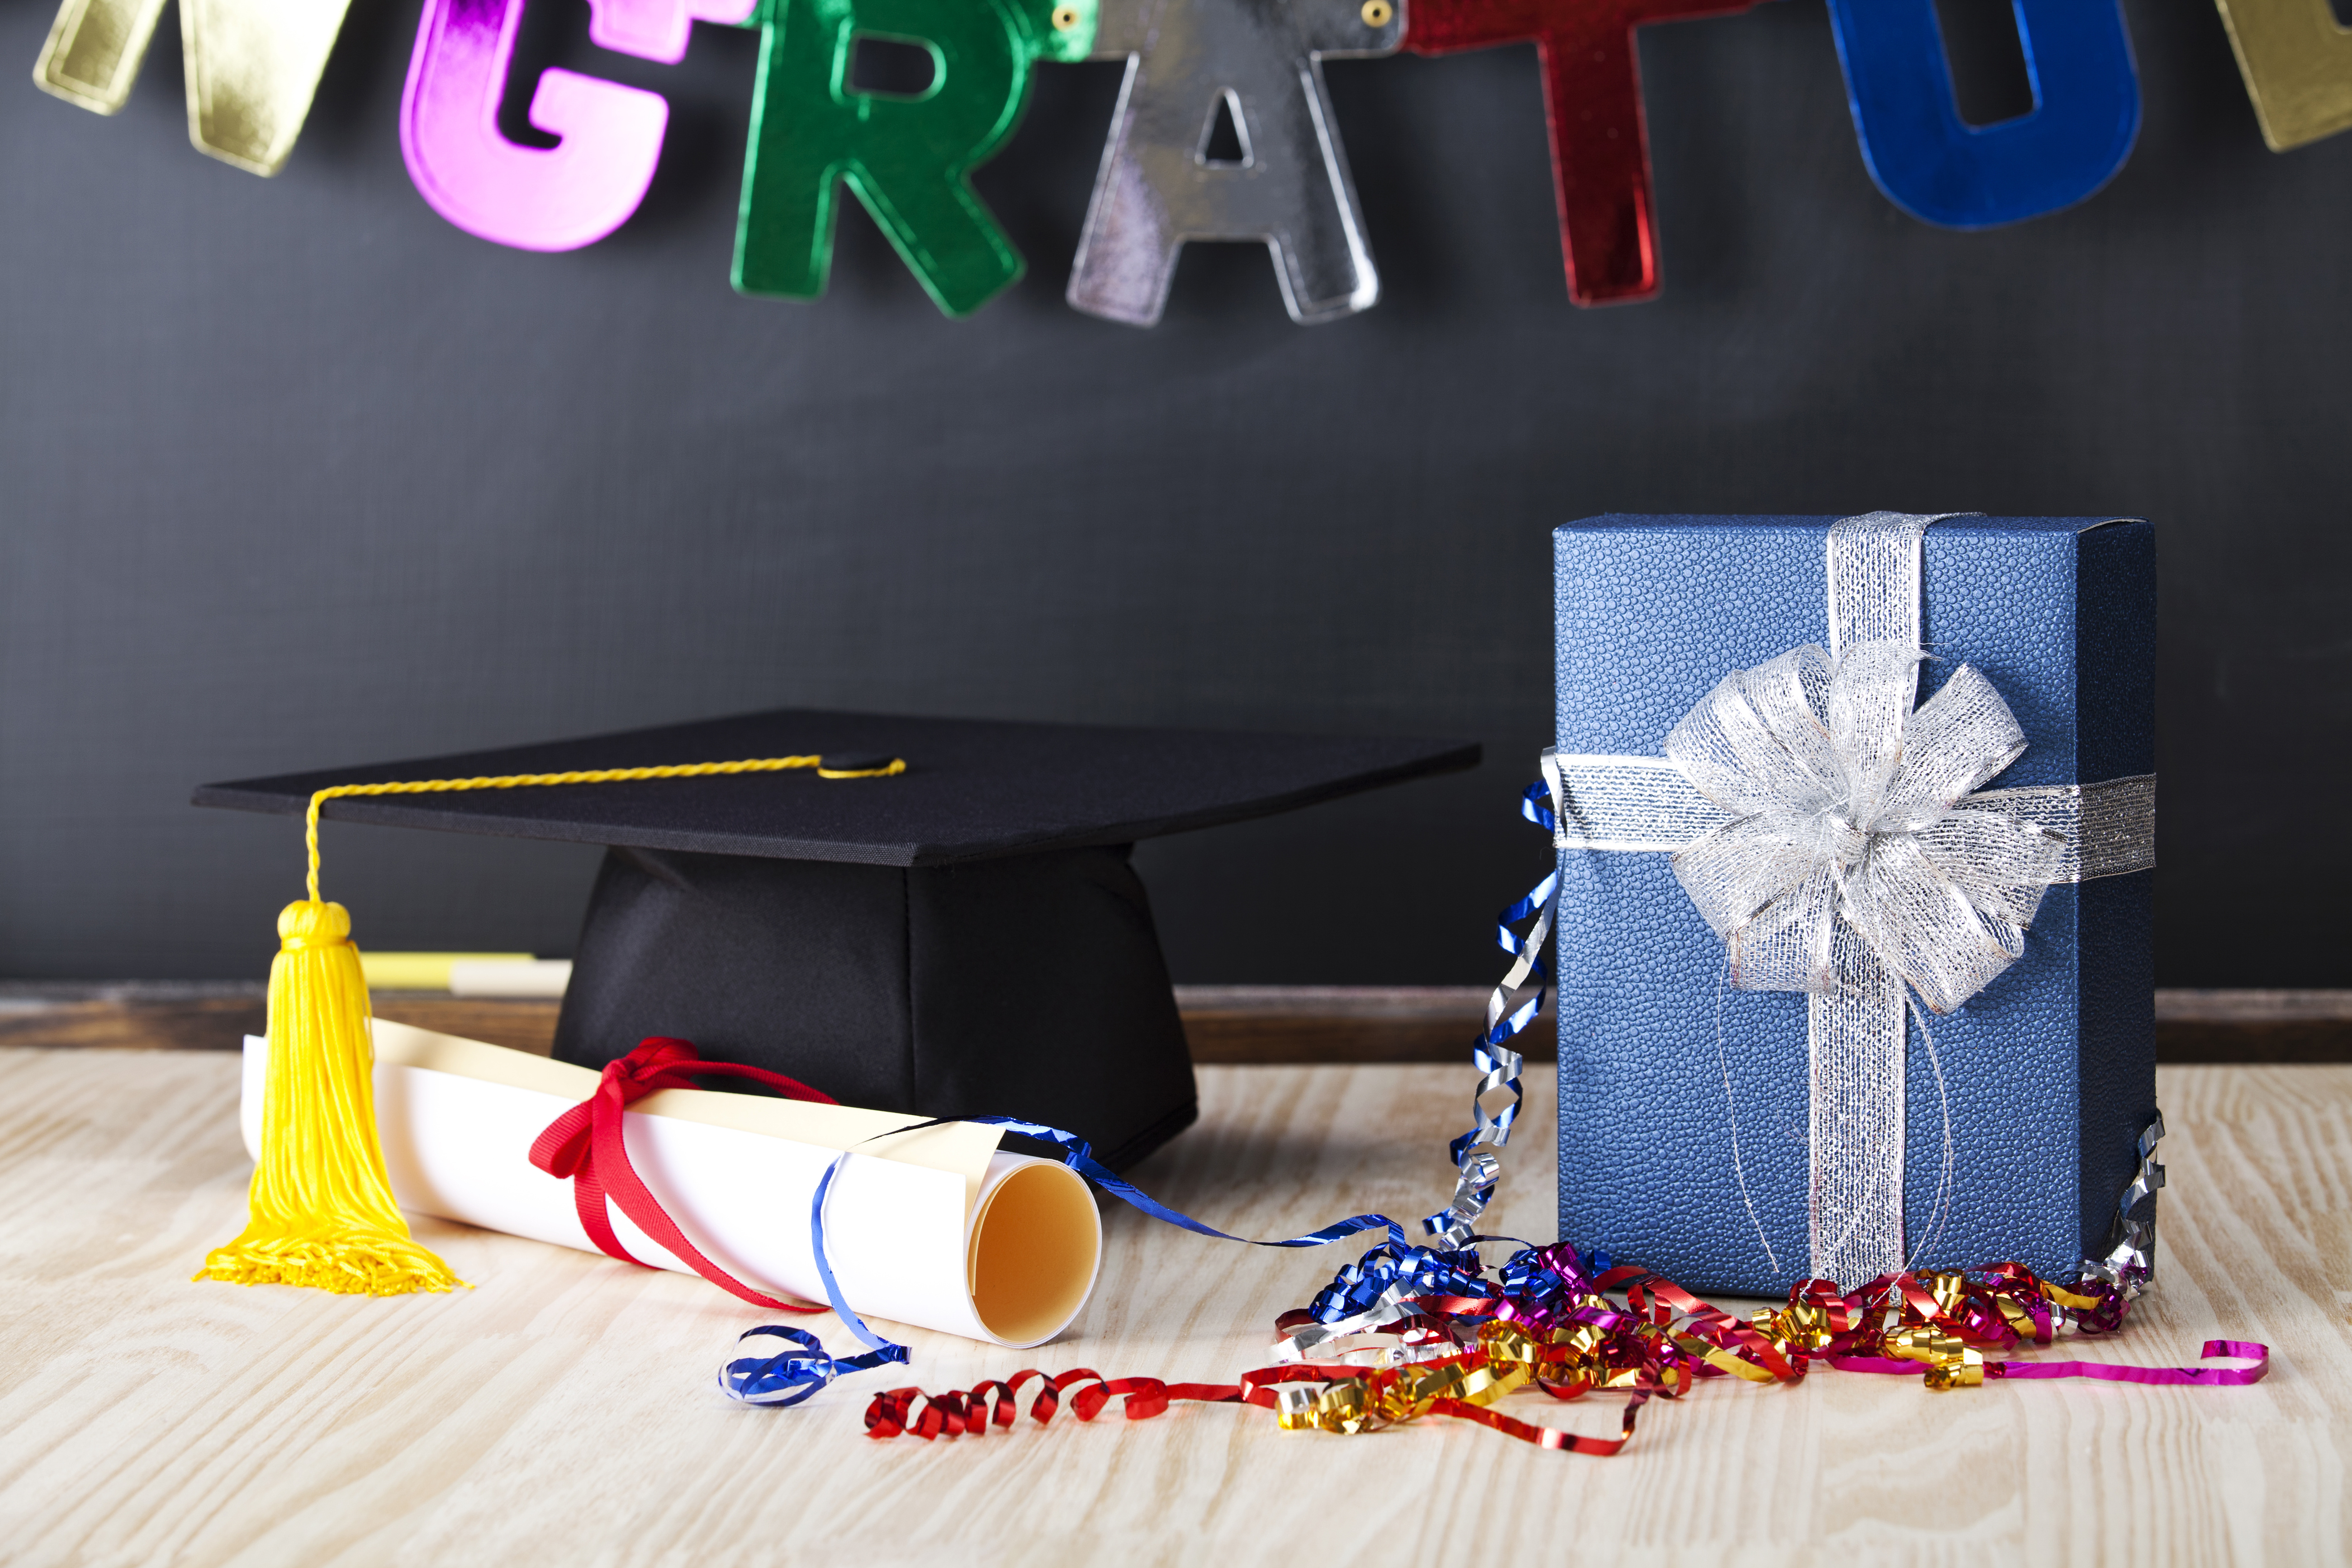 Ware You’ll Find the 9 Best Auburn Graduation Gifts!